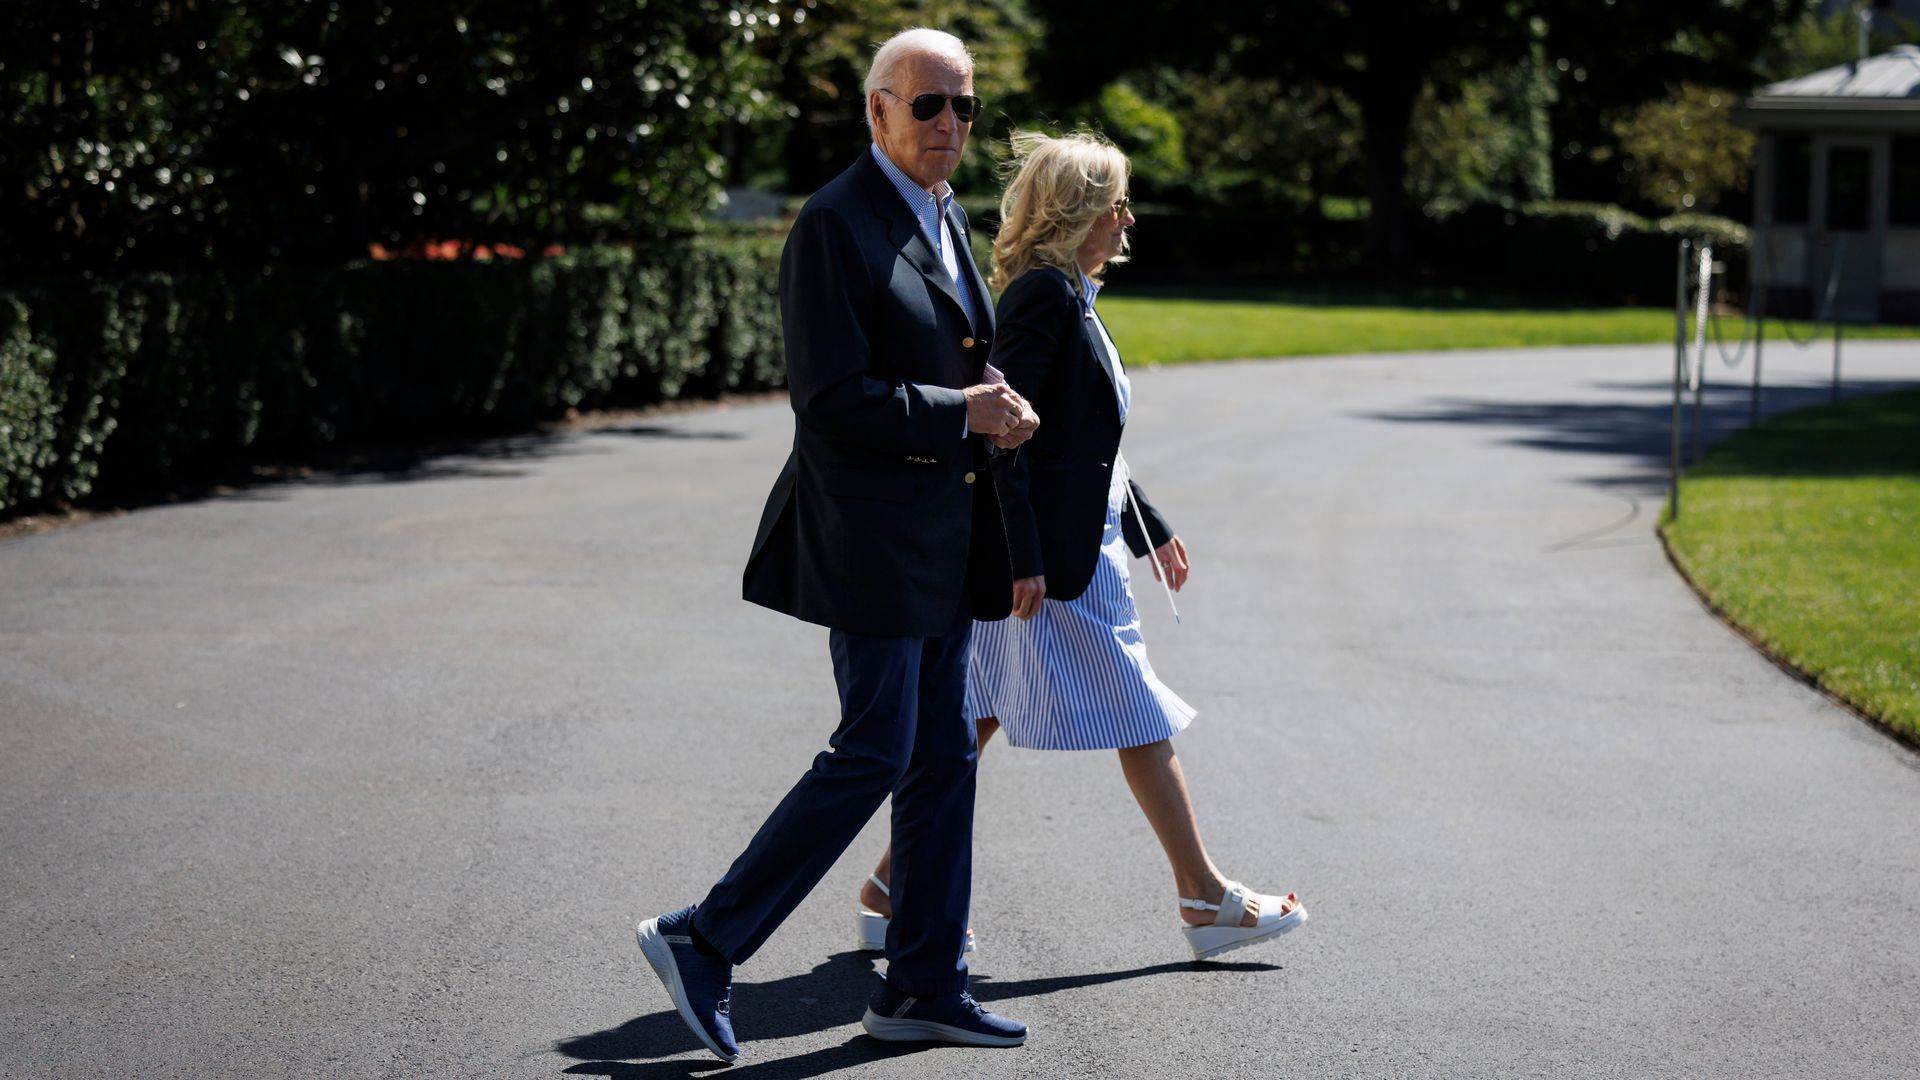 President Biden and First Lady Jill Biden walk across a driveway at the White House. The president is wearing a sports jacket, casual trousers and tennis shoes.